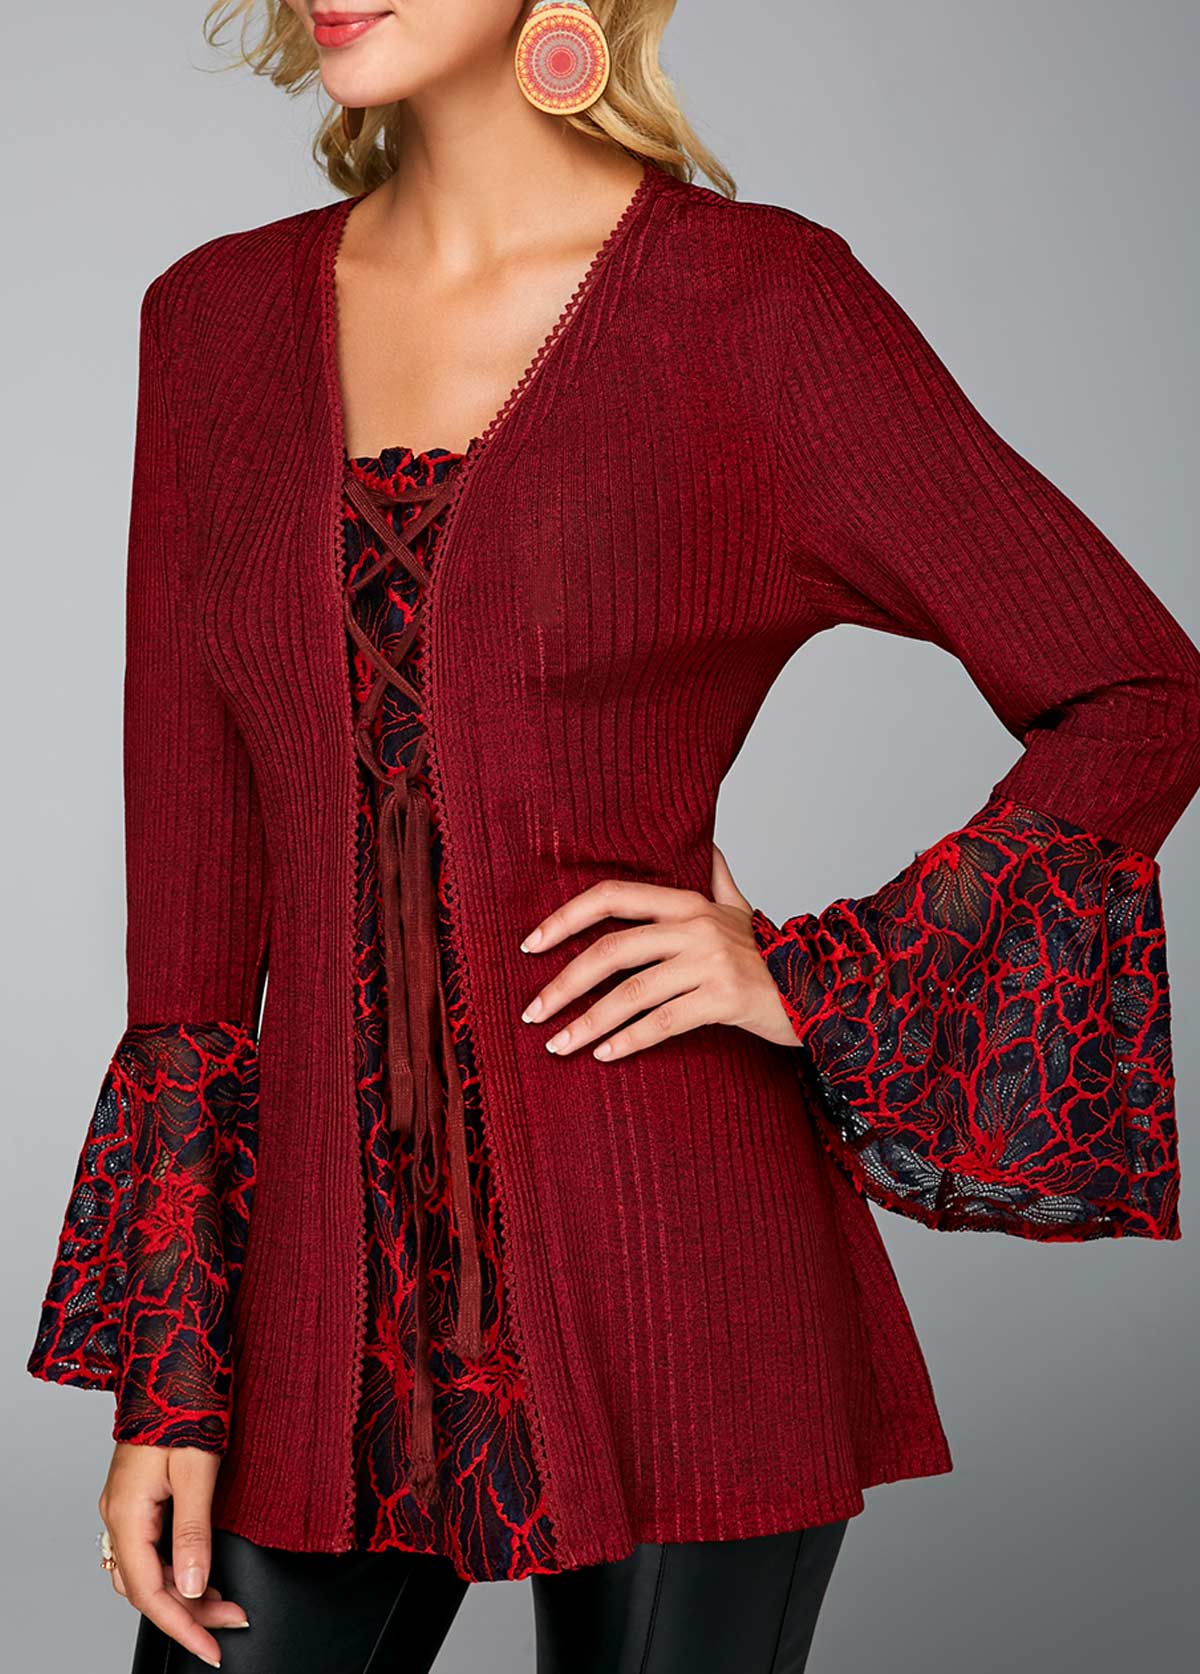 Picot Trim Lace Up Wine Red Sweater